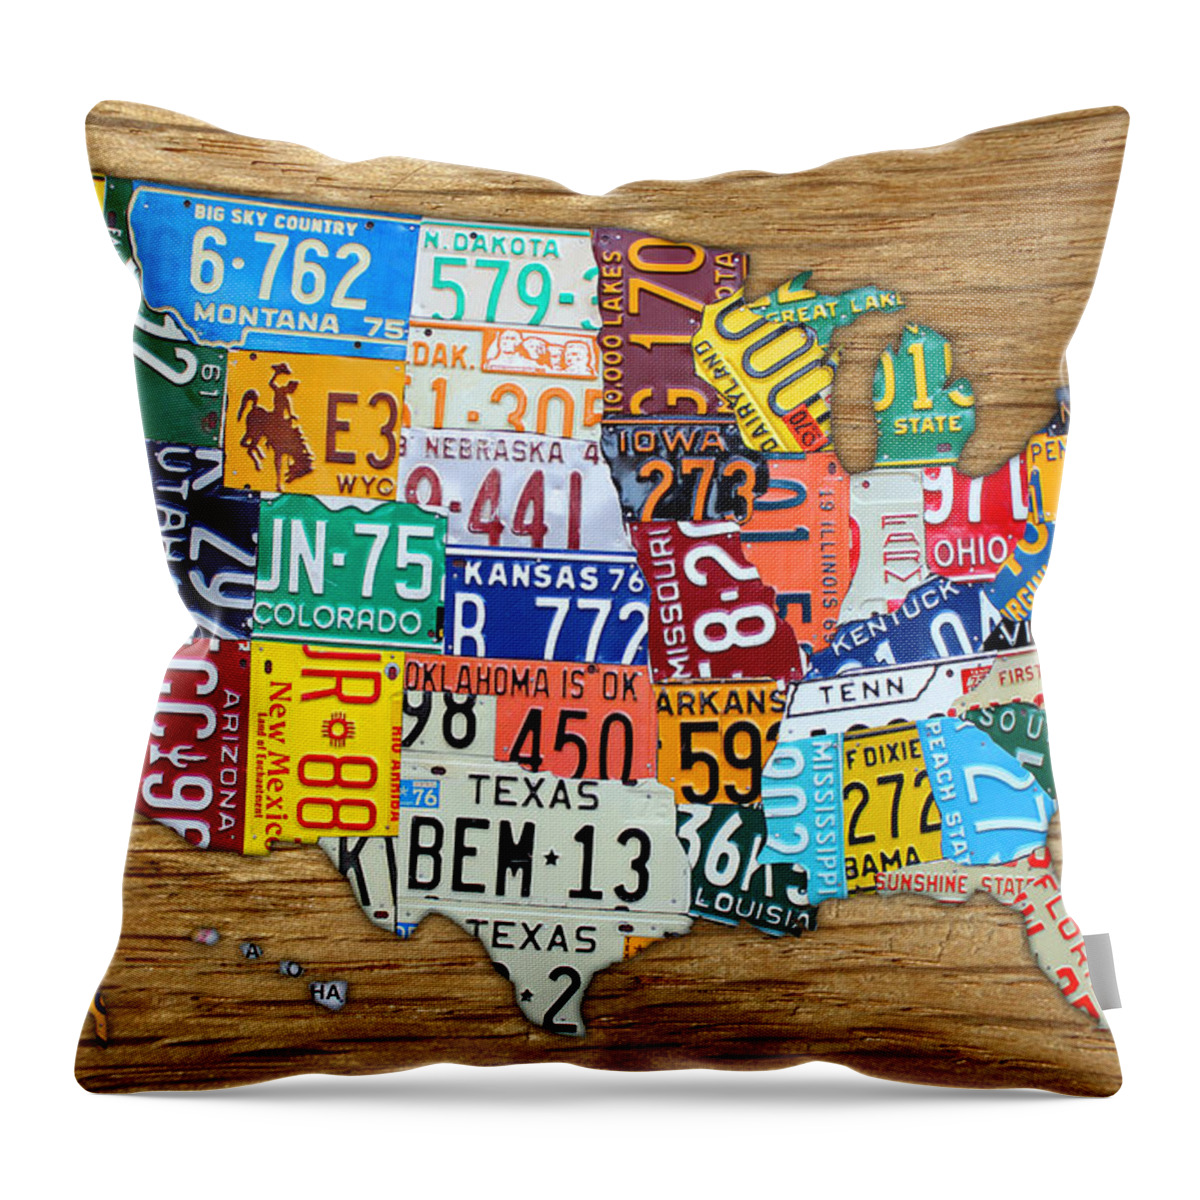 License Plate Map Throw Pillow featuring the mixed media USA License Plate Map Car Number Tag Art on Light Brown Stained Board by Design Turnpike